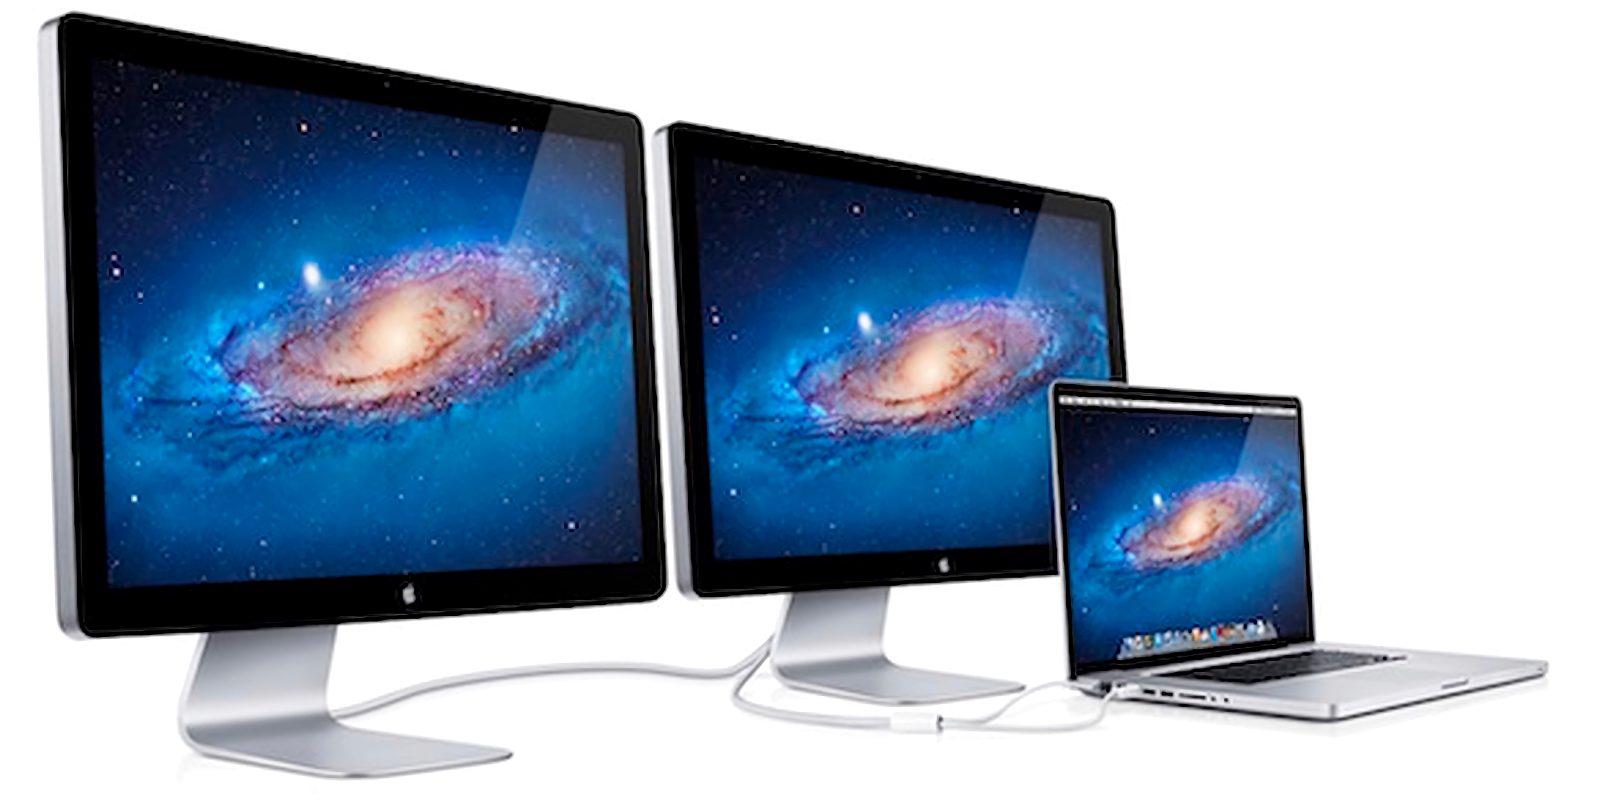 Thunderbolt Display, 'the ultimate docking station for your Mac